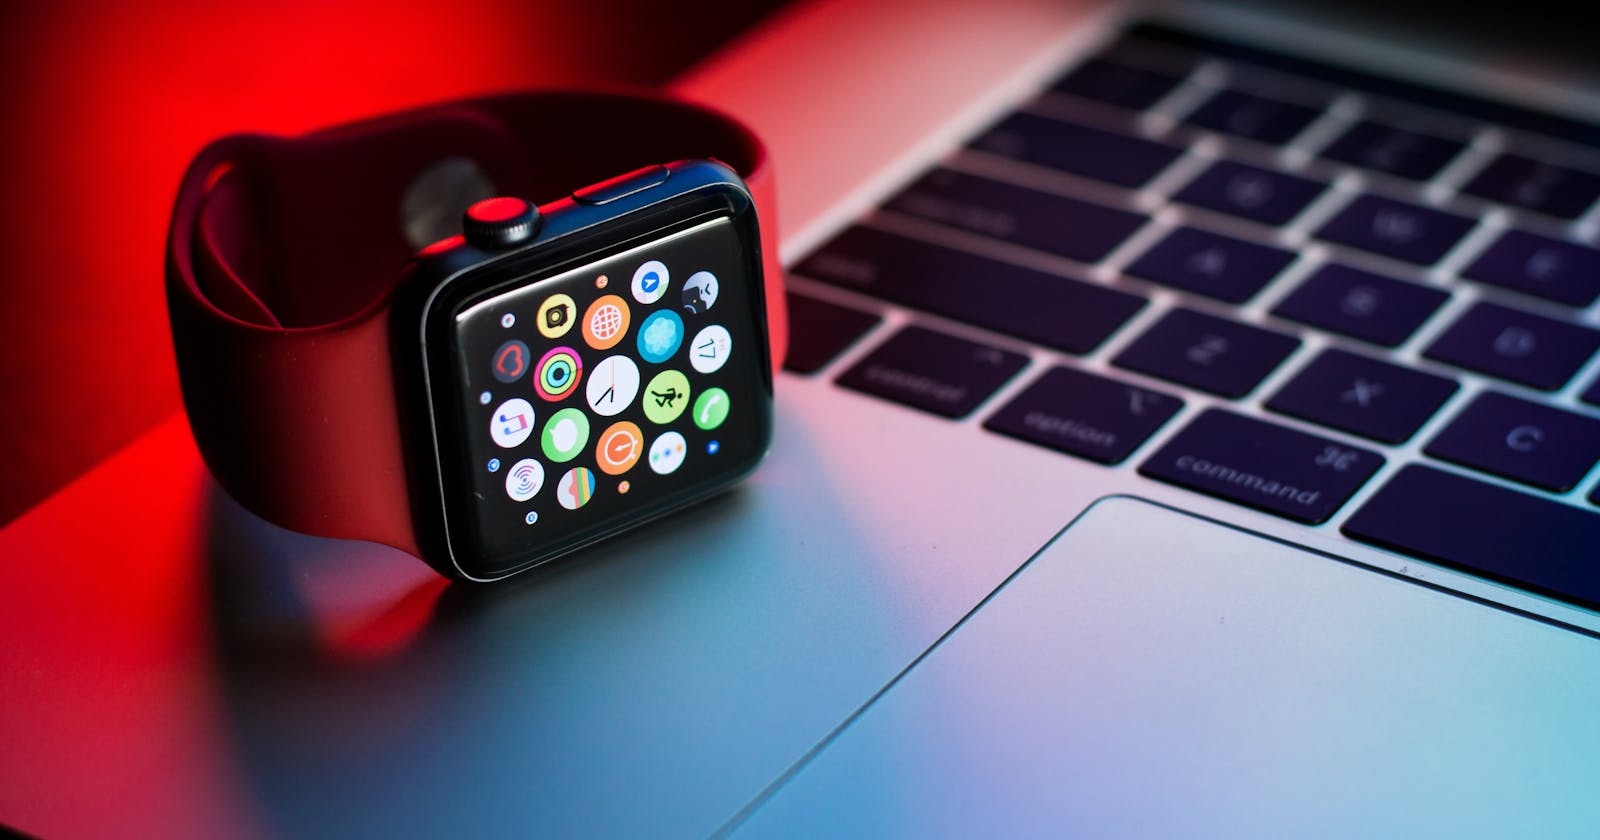 Build the first Apple watch app using Swift - 2